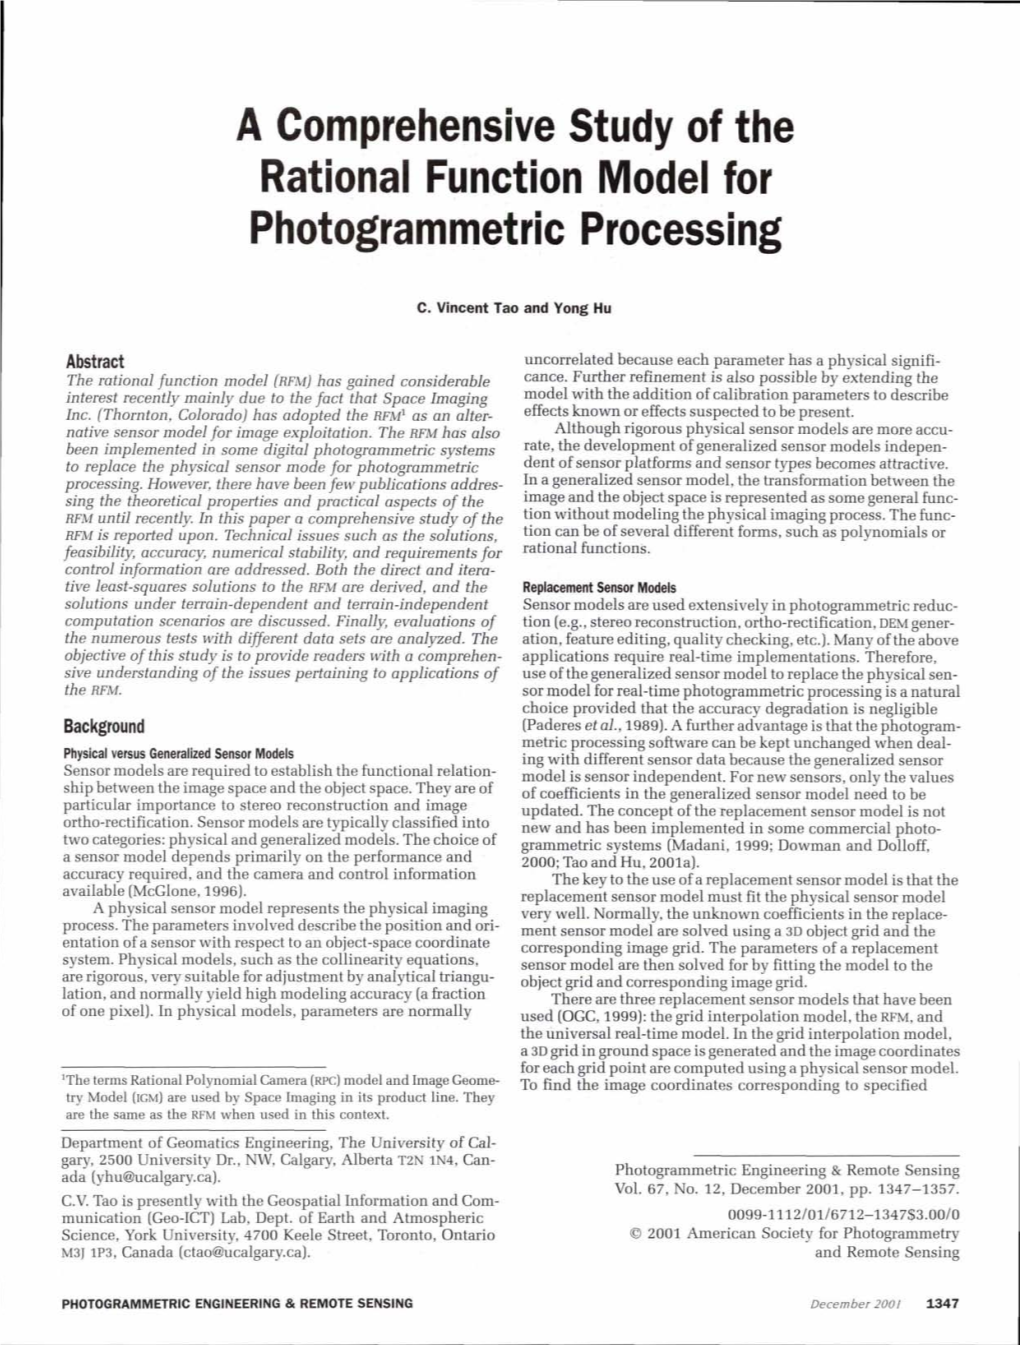 A Comprehensive Study of the Rational Function Model for Photogrammetric Processing